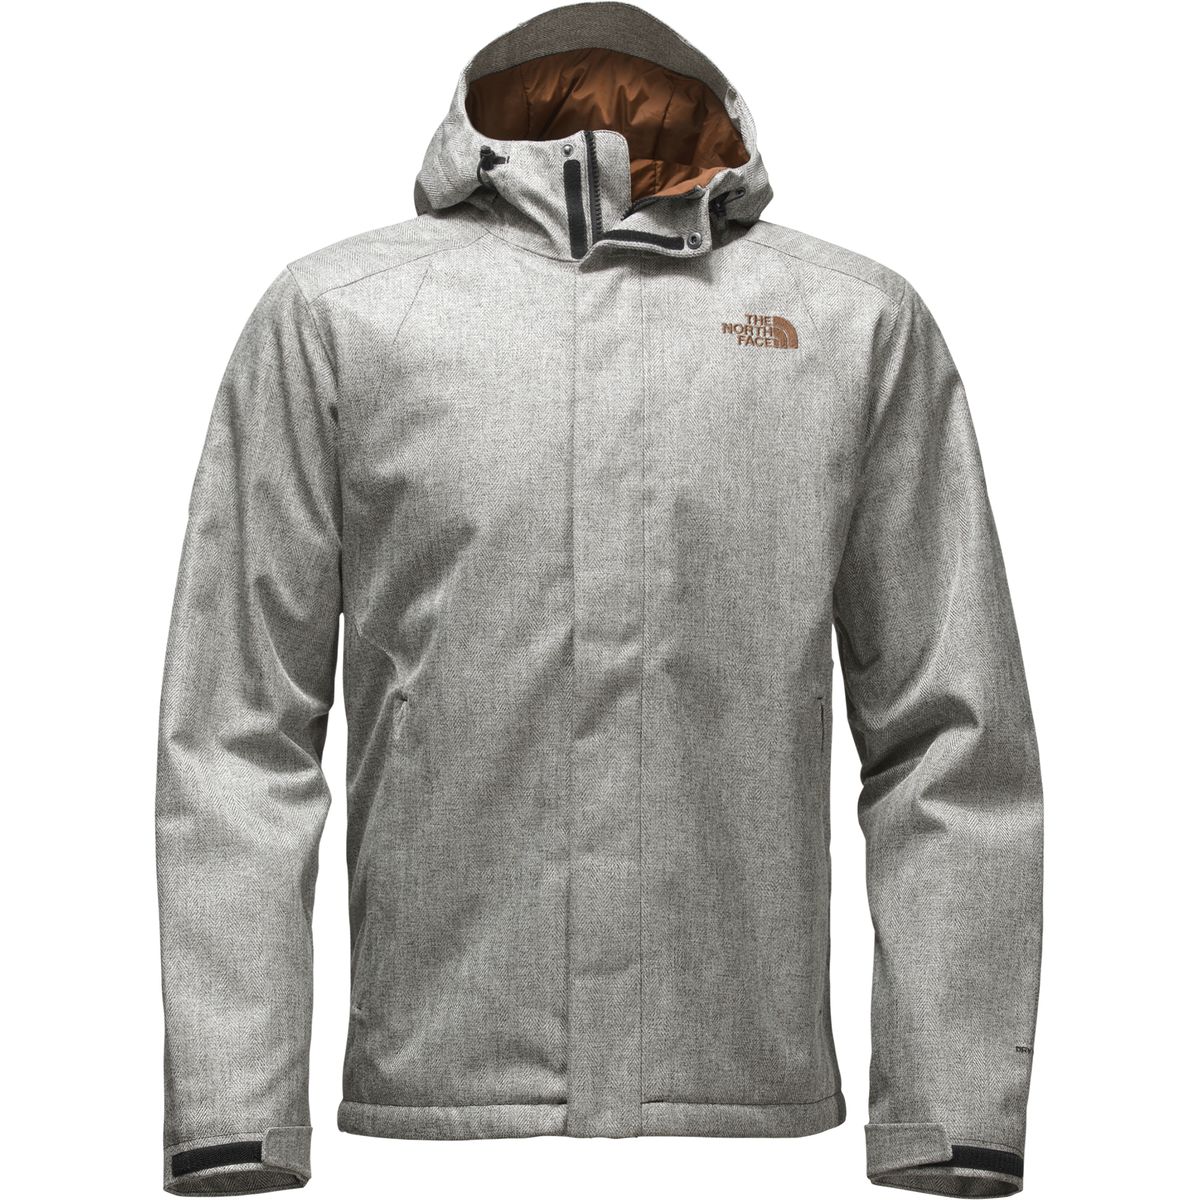 men's inlux insulated jacket